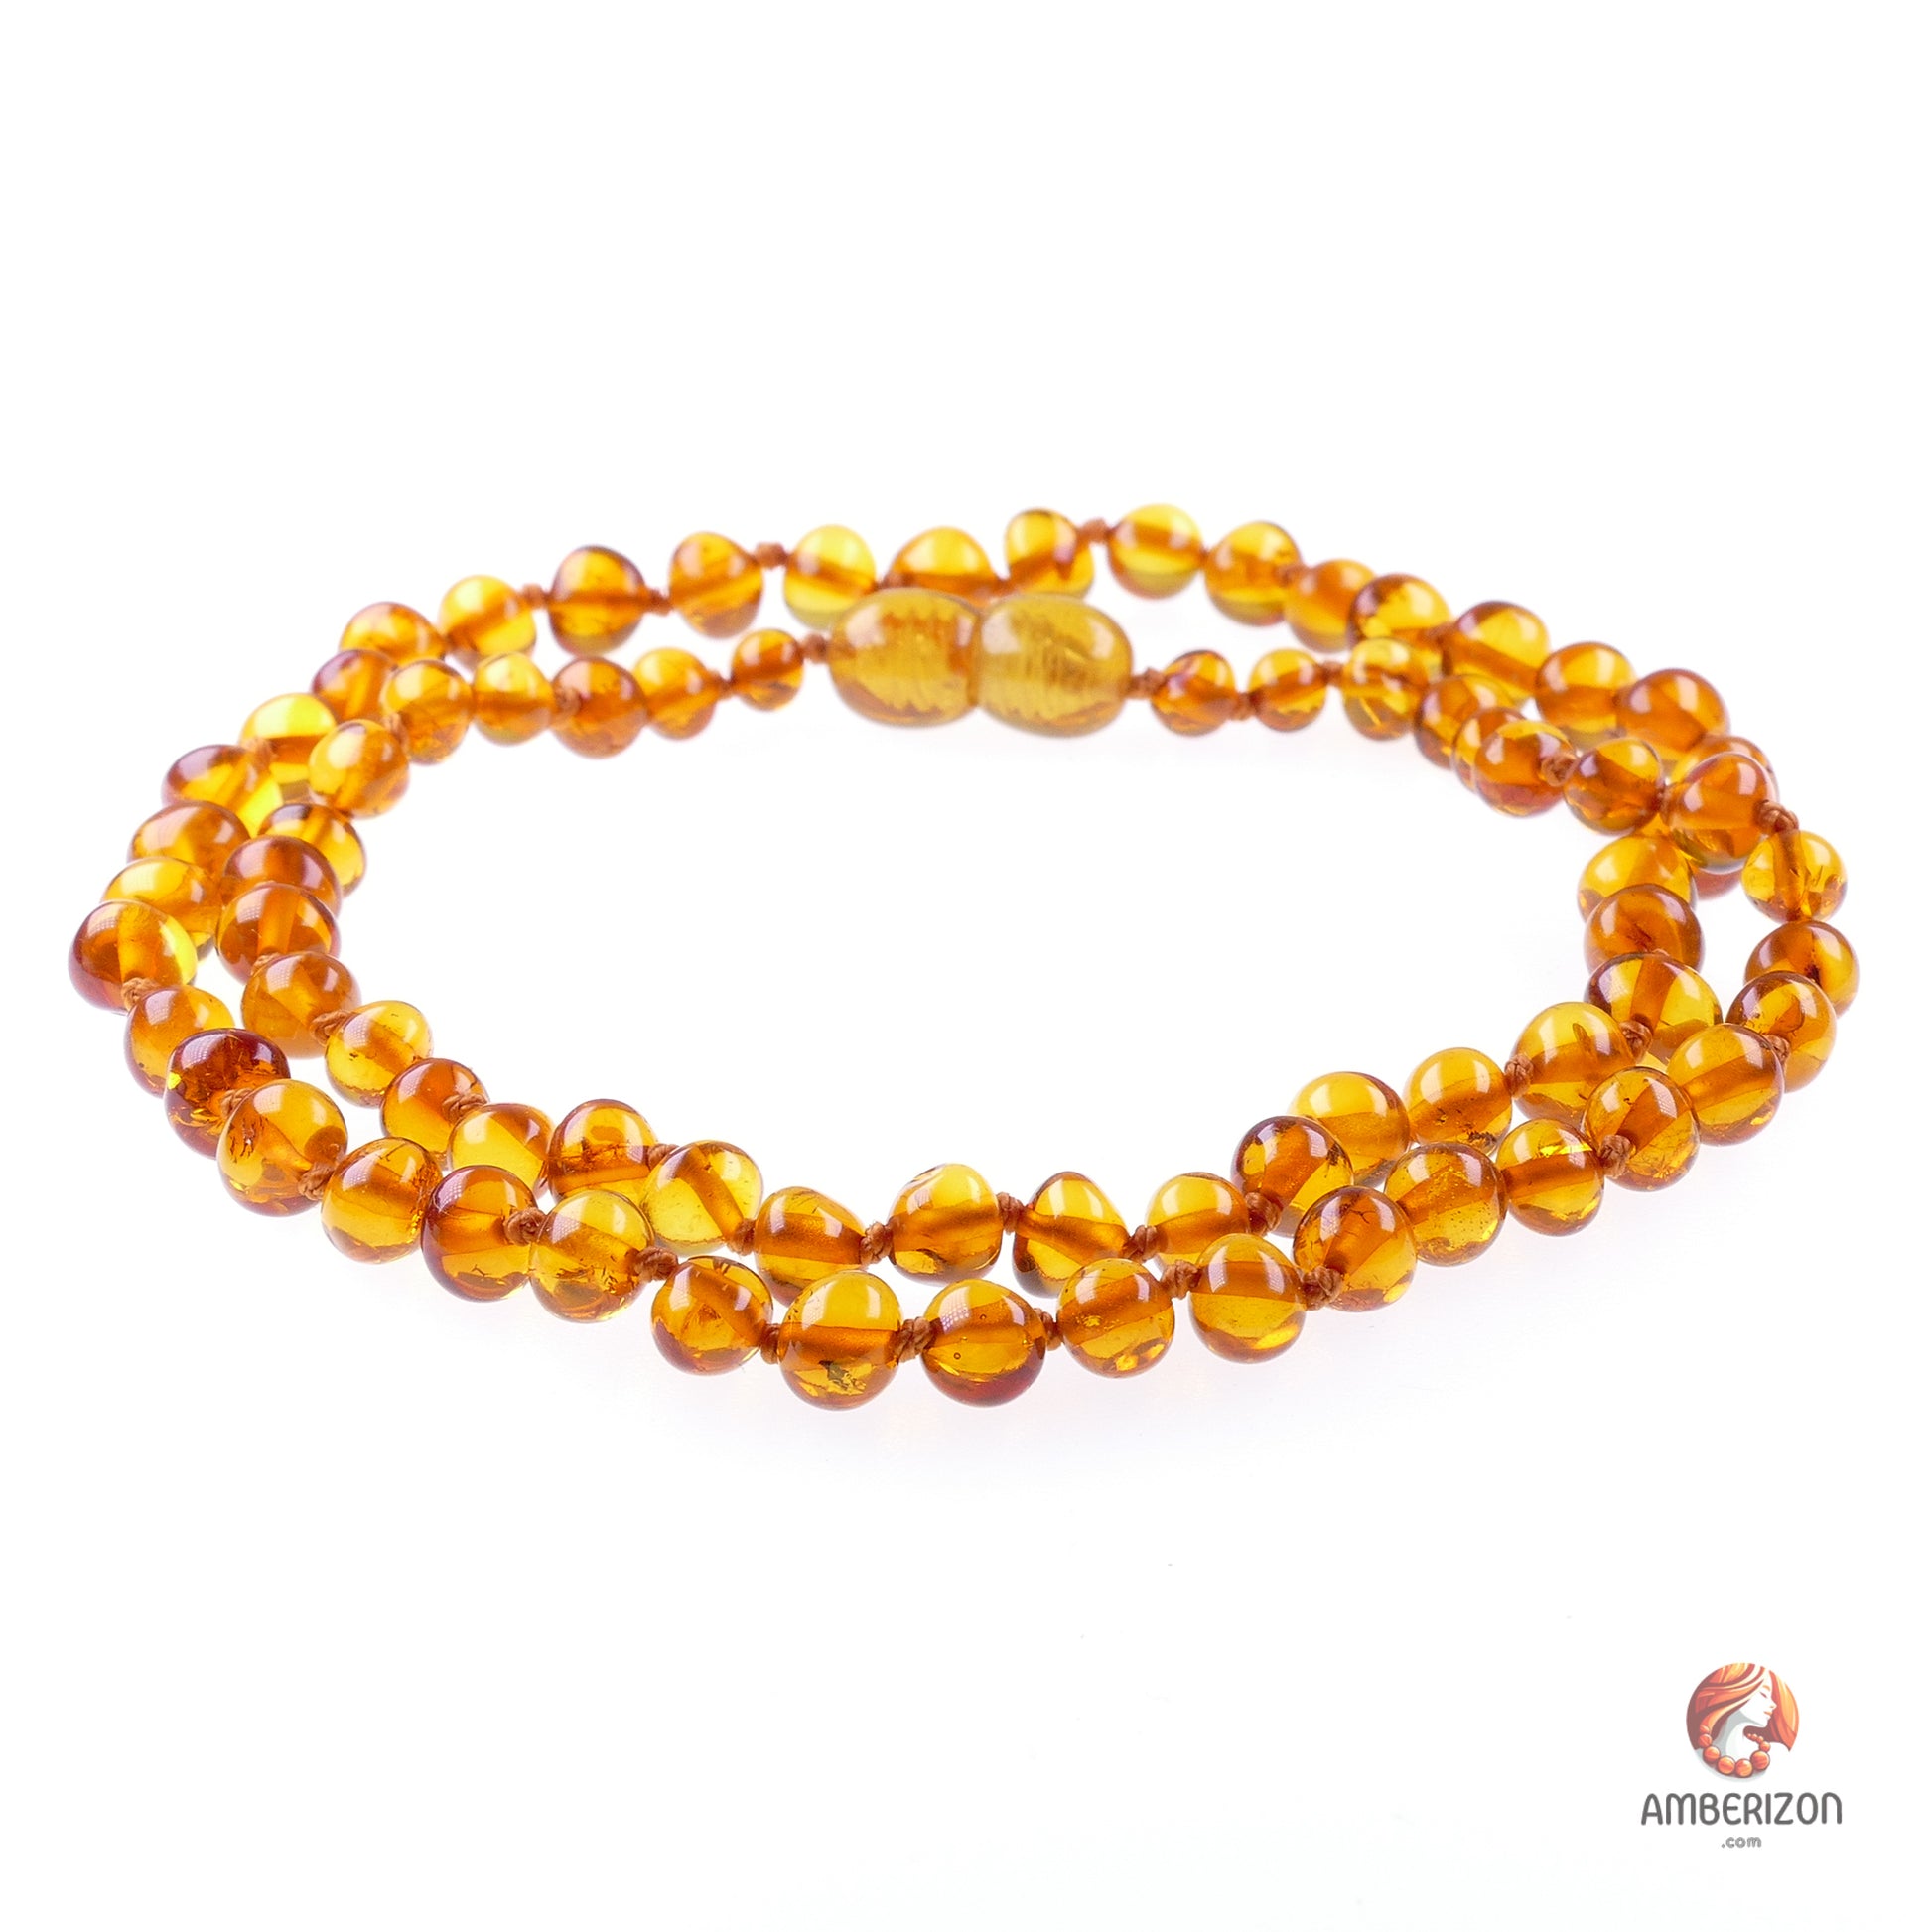 Certified Unisex Baltic Amber Necklace - Glossy Finish - Twist Barrel Clasp